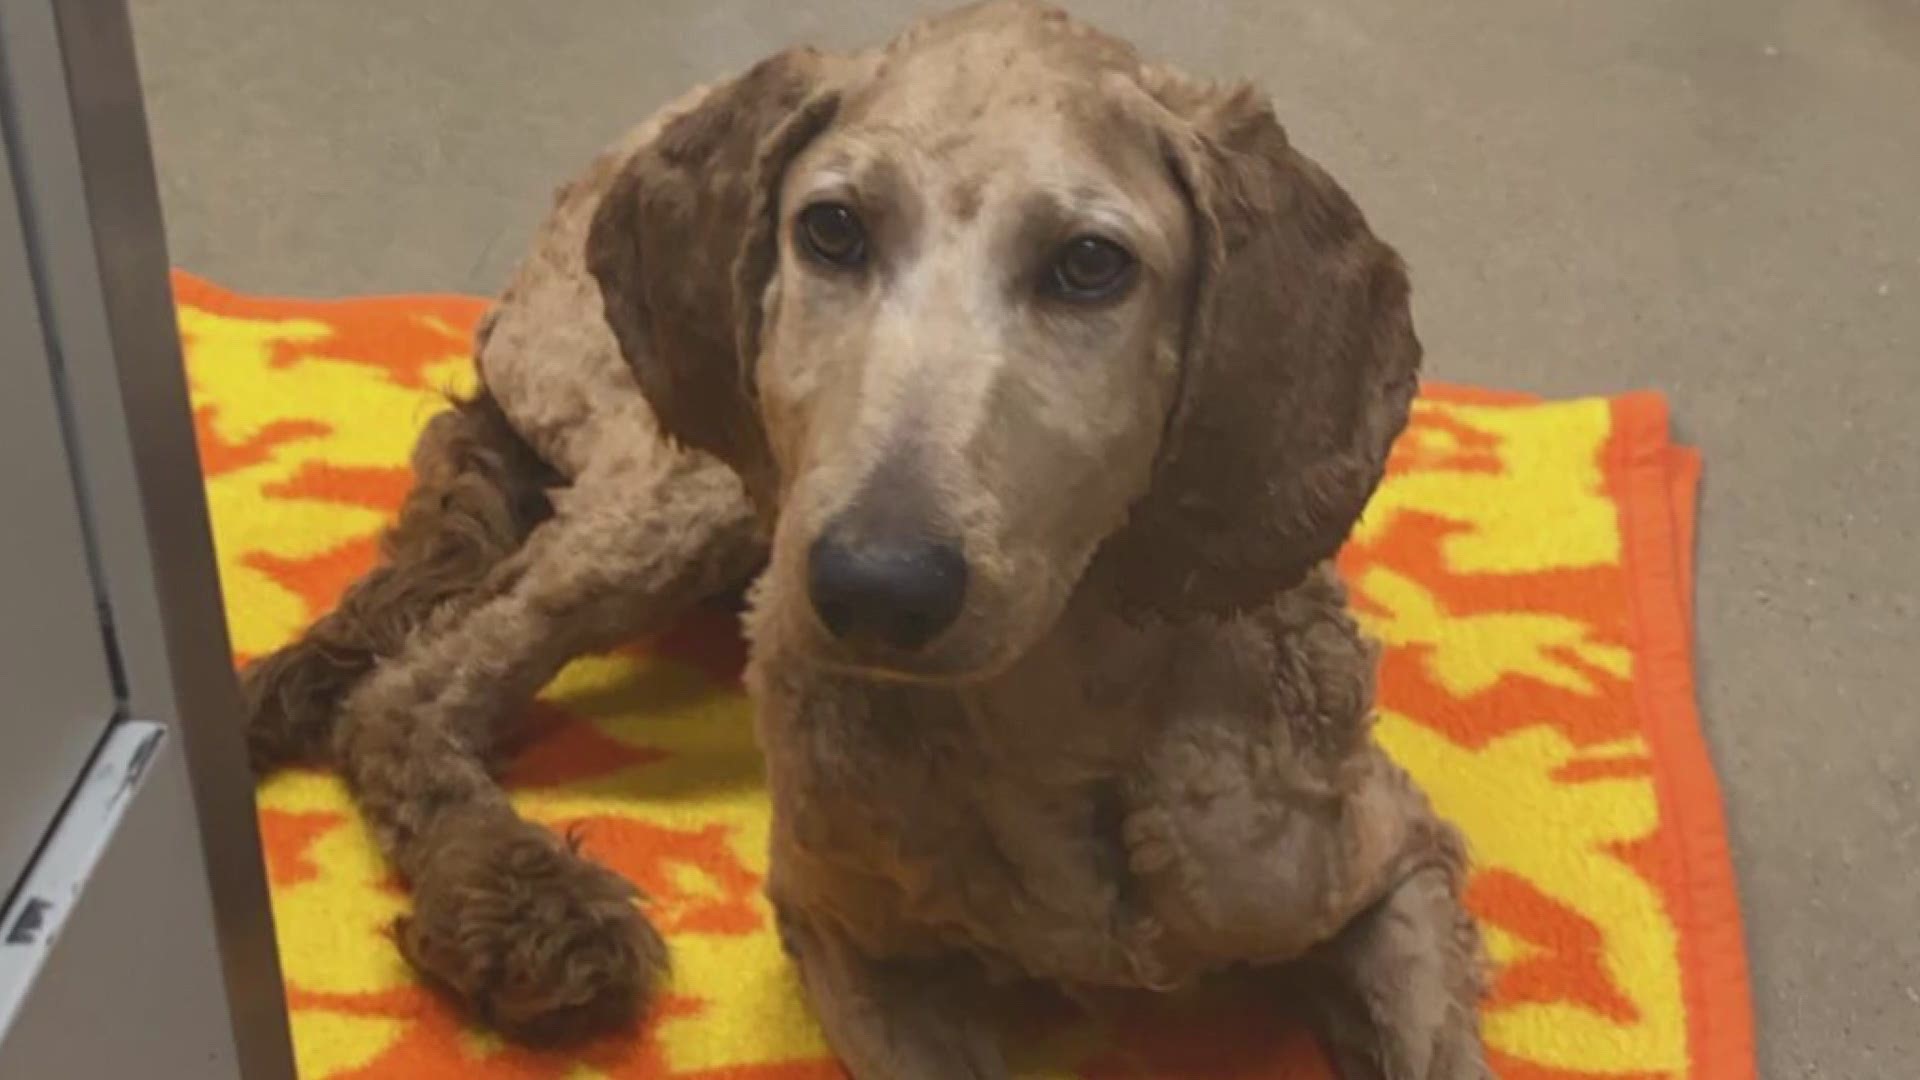 Michigan Doodle Rescue Connect rescued a dog from abuse in Fremont 6 months ago.